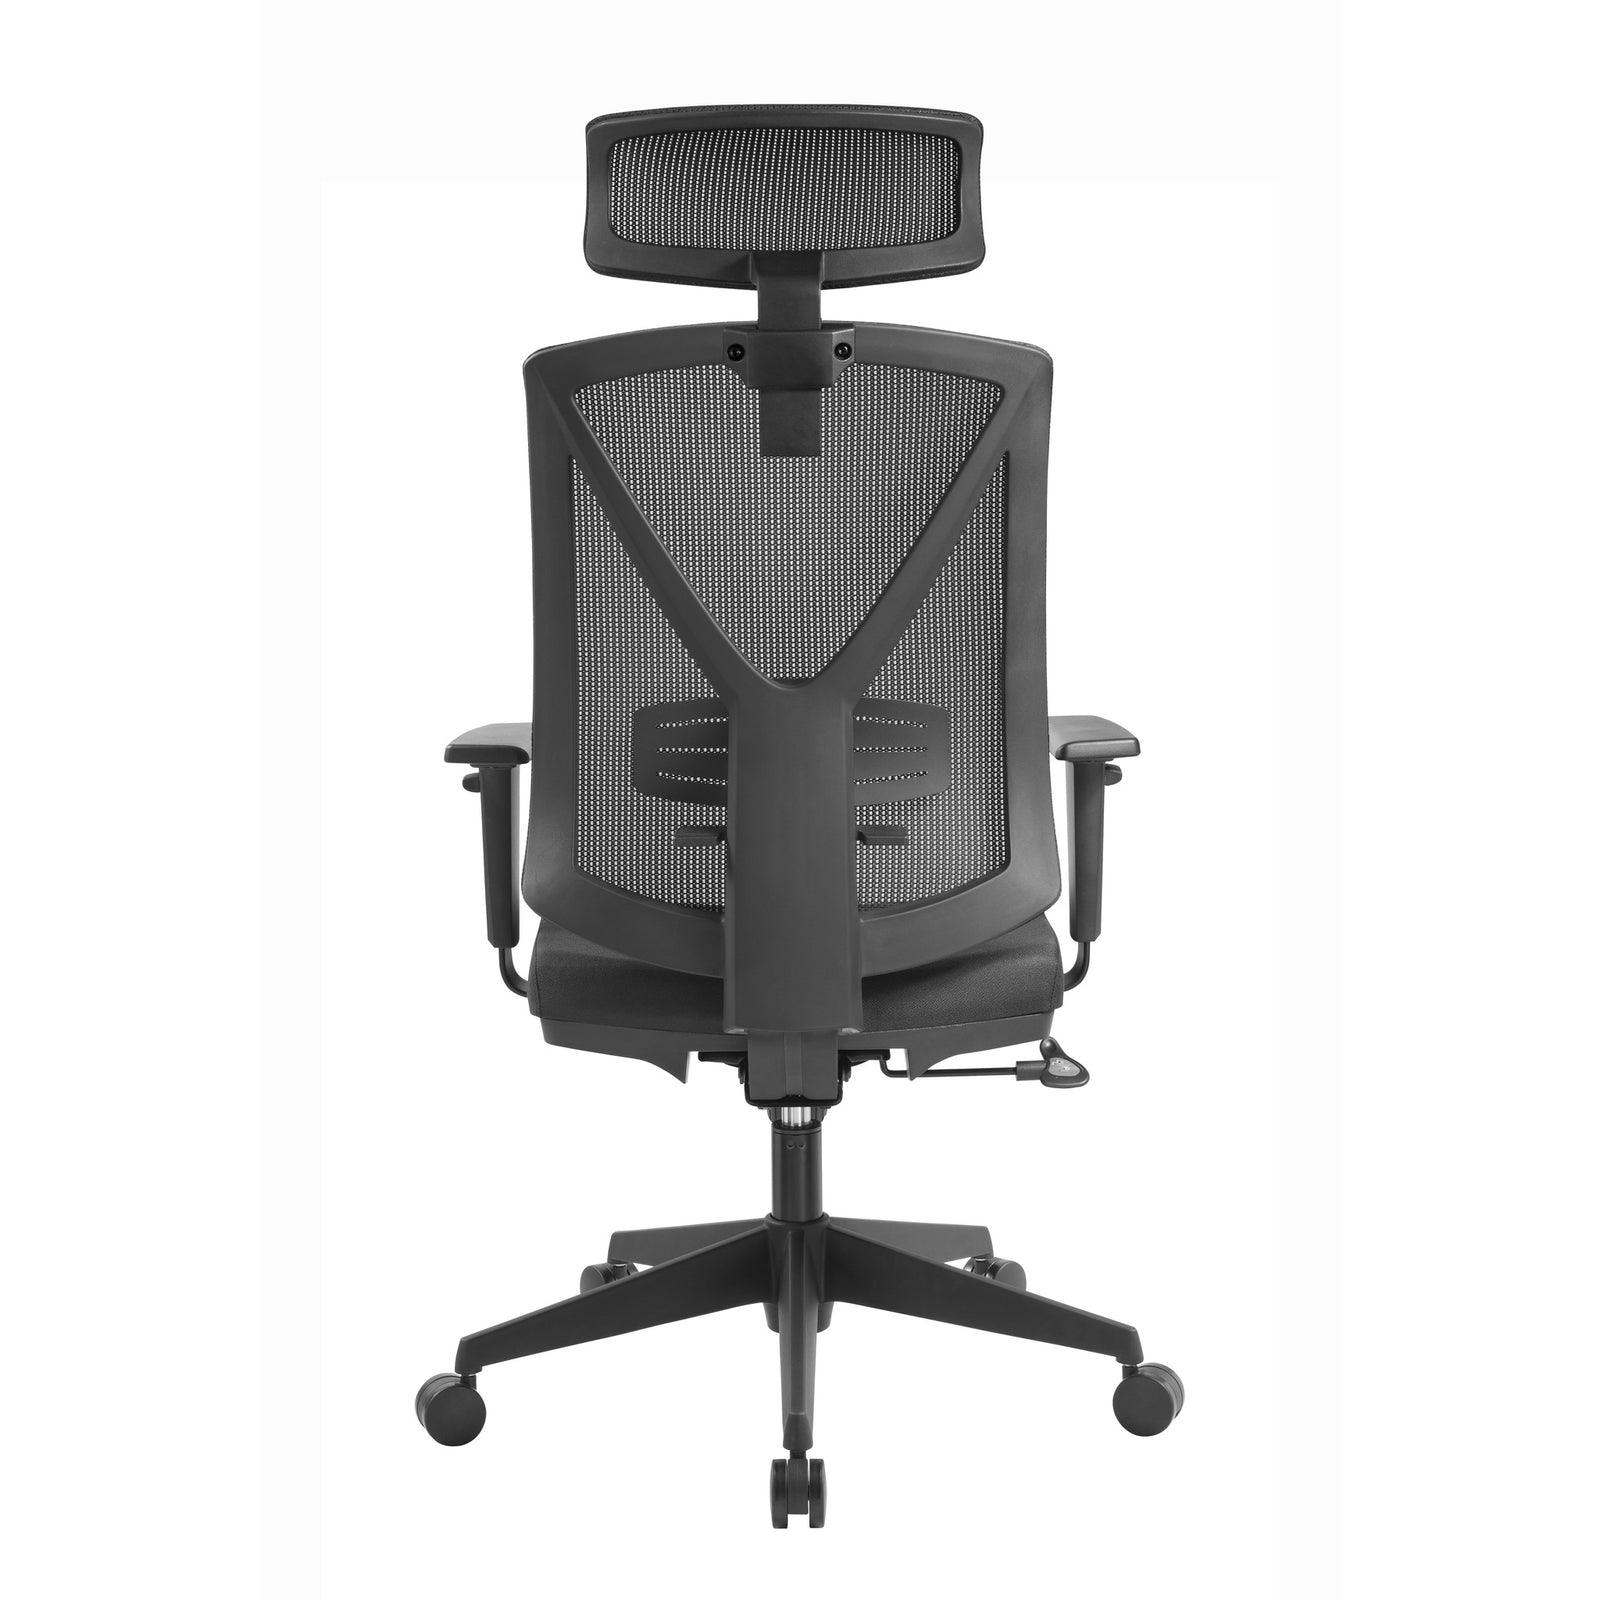 Mesh Ergonomic Office Chair with Headrest - Black - Office/Gaming ChairsOC8256-UN 2